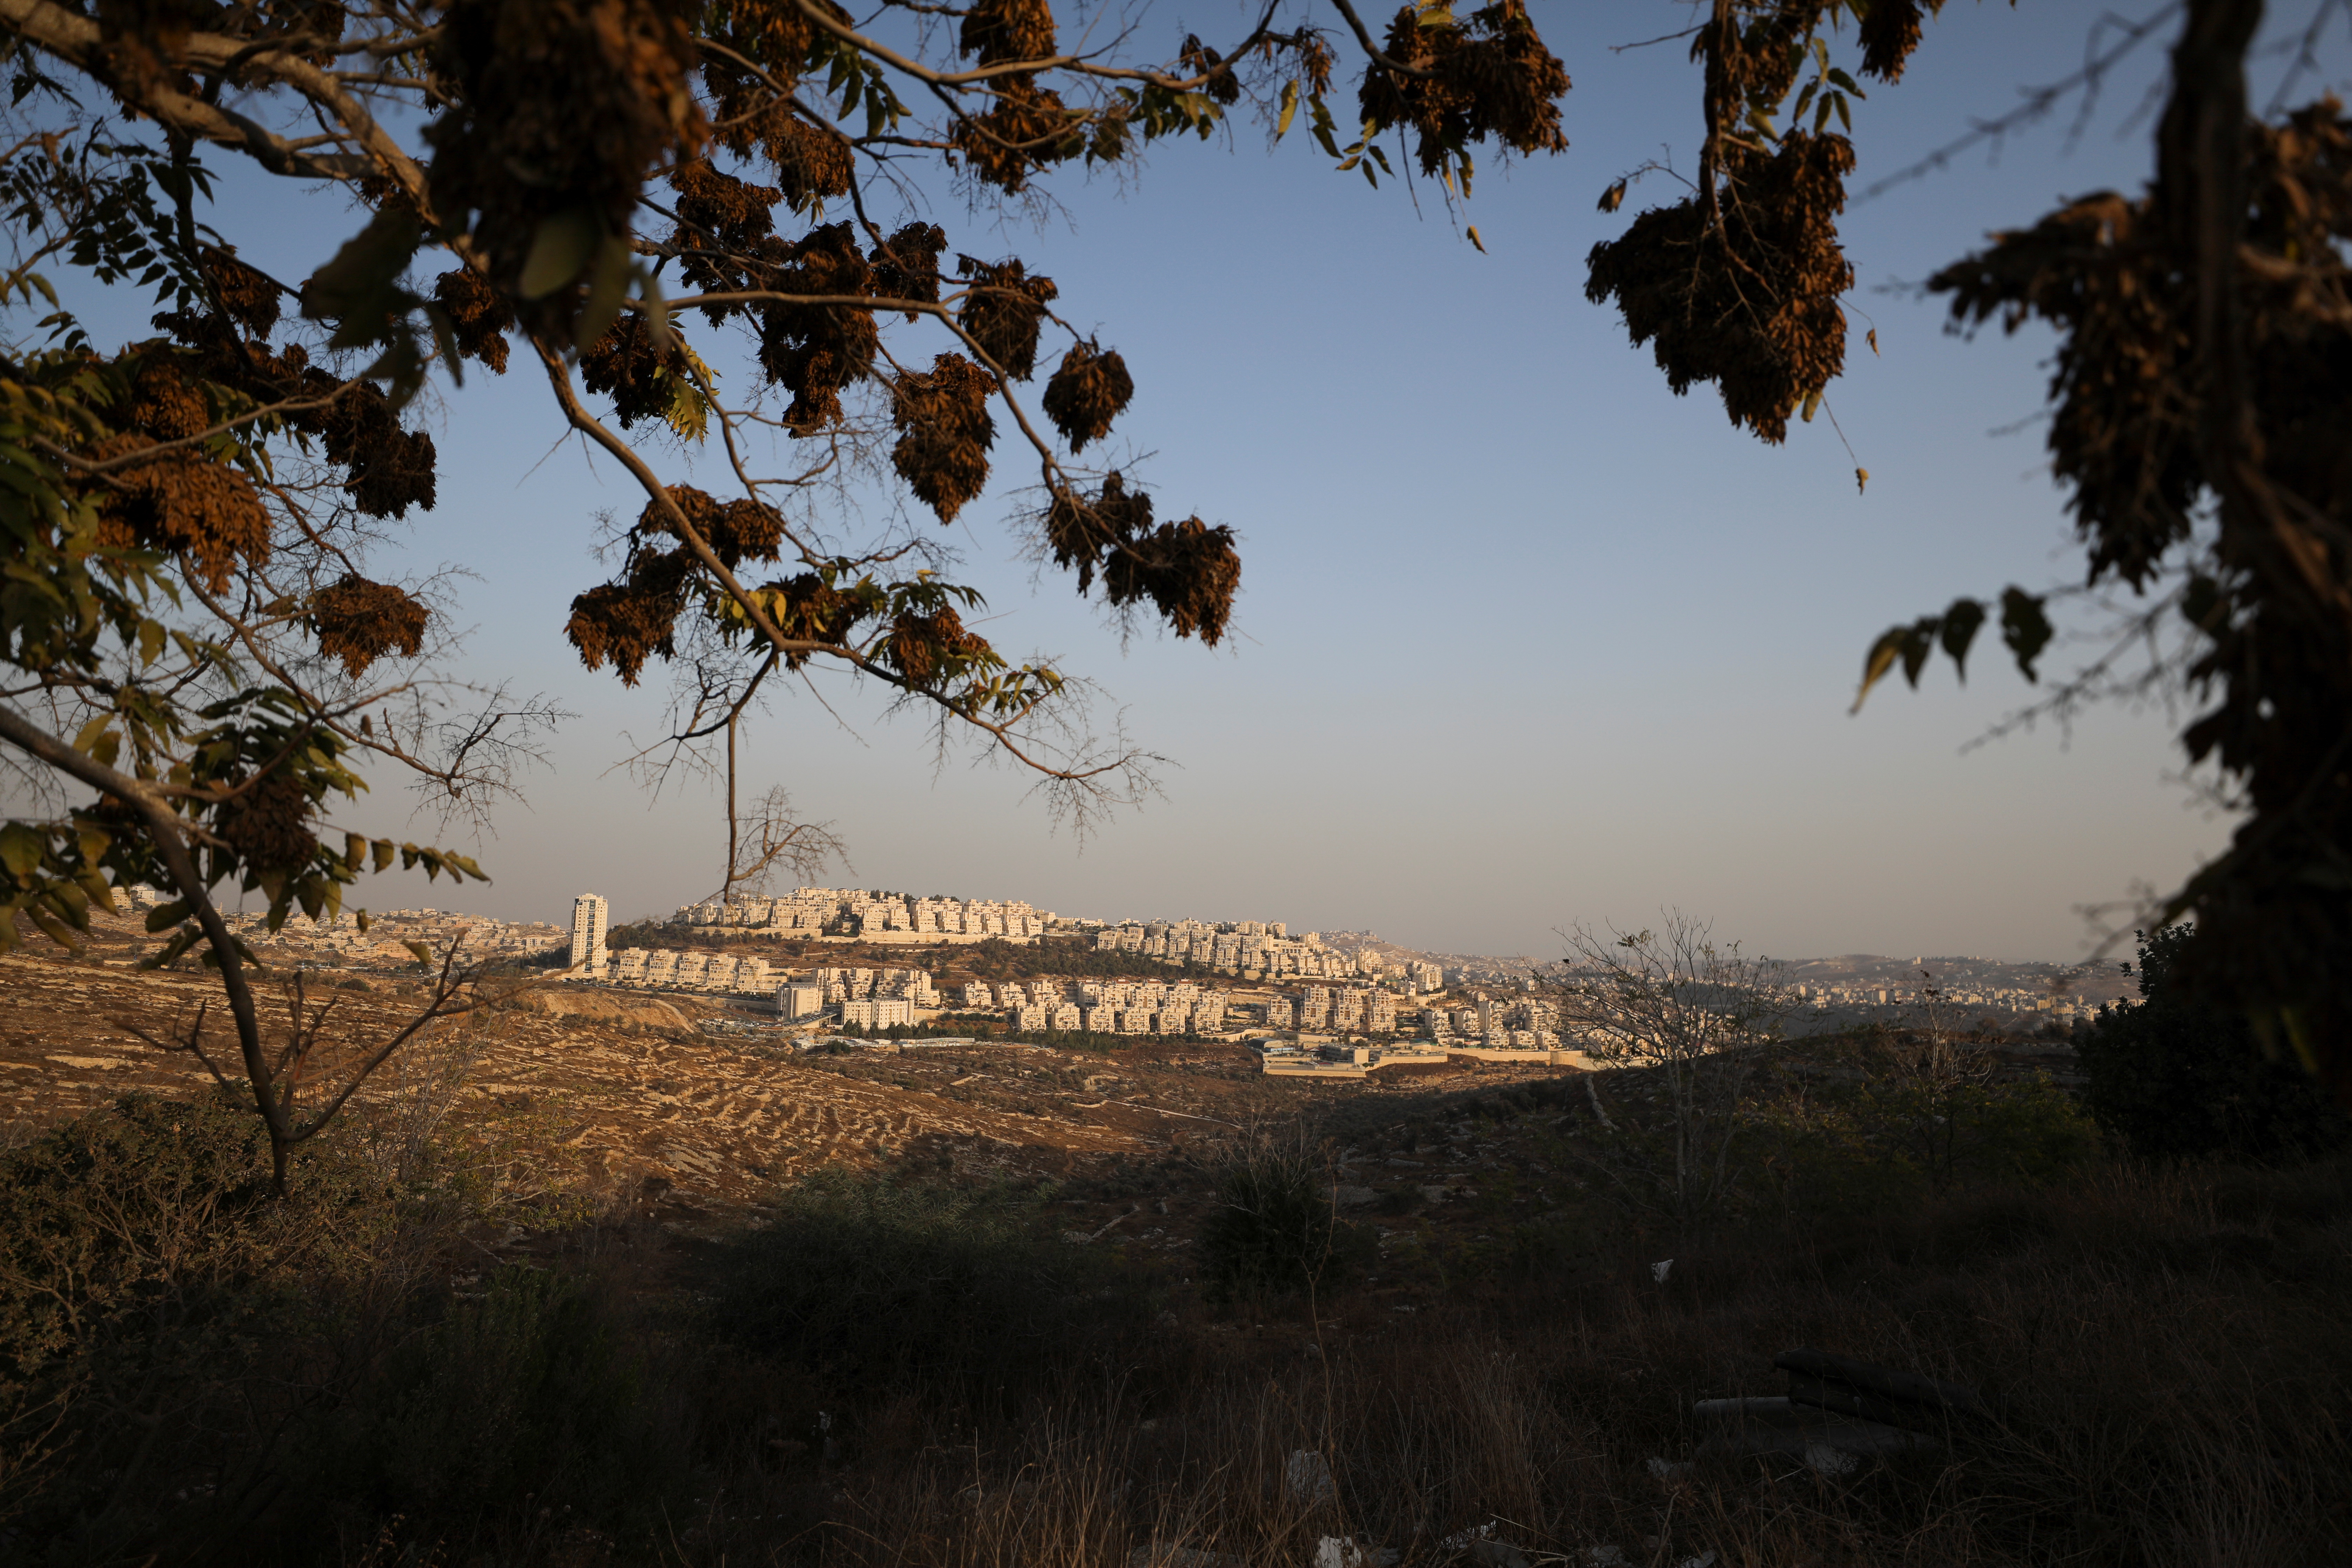 A view shows the Israeli settlement of Har Homa in the Israeli-occupied West Bank, October 27, 2021 REUTERS/Ammar Awad